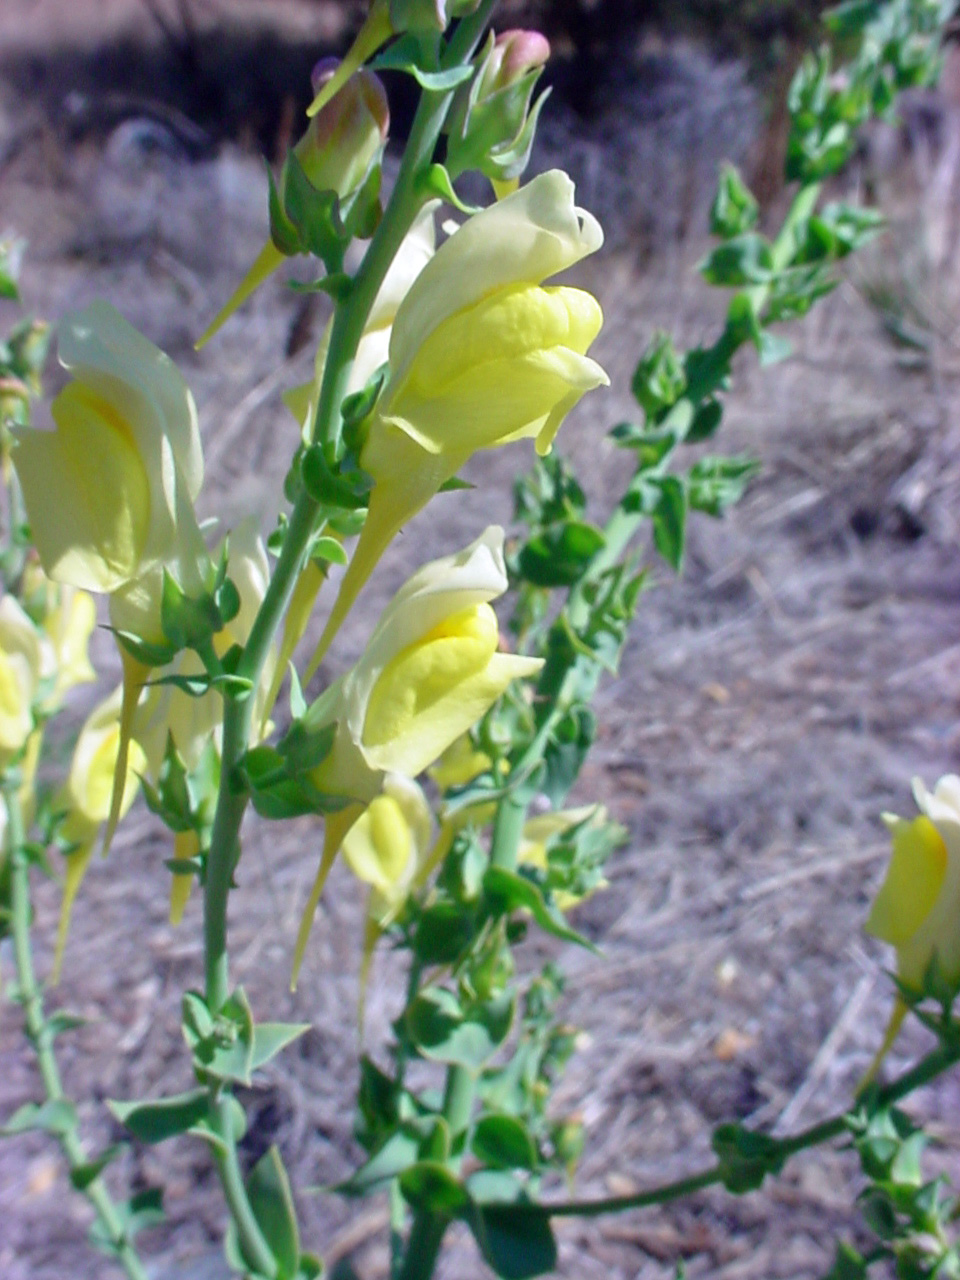 Distinctive spur on the yellow flowers